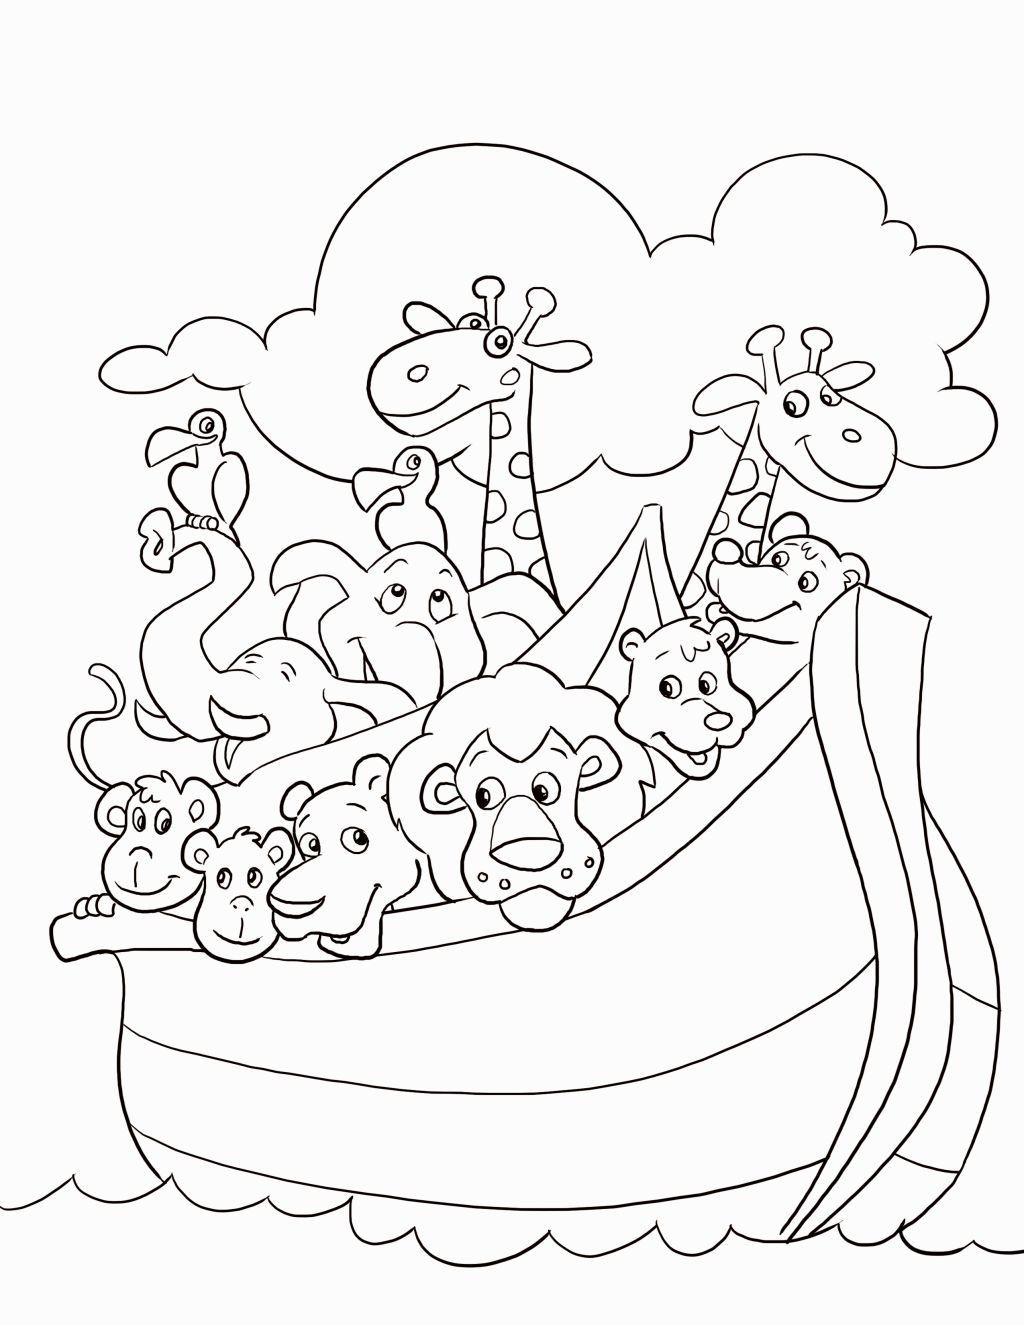 Christian Coloring Pages For Toddlers
 Christian Coloring Pages For Preschoolers